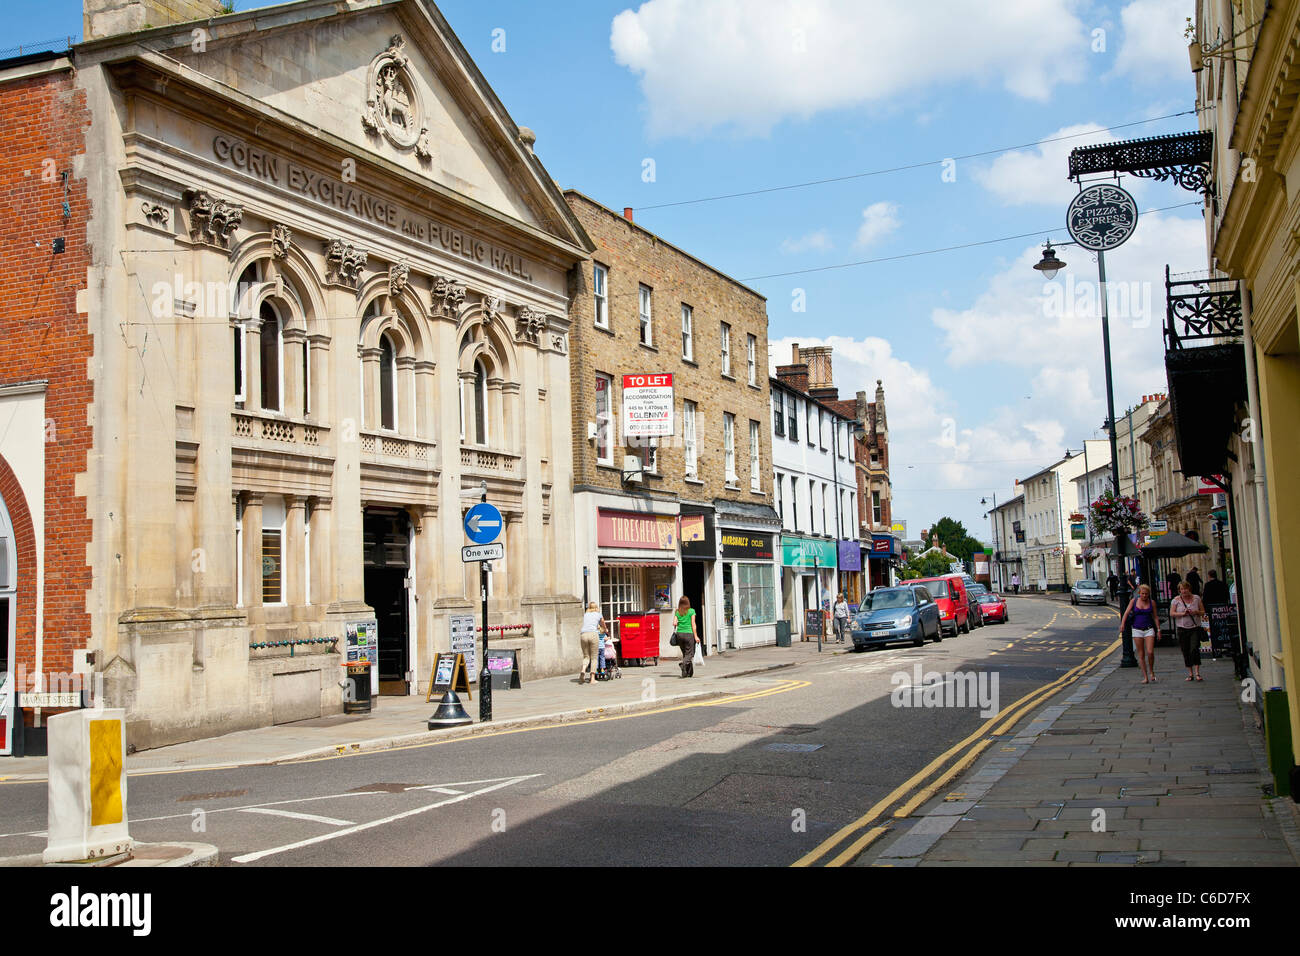 Corn exchange building in the county town of Hertford Stock Photo